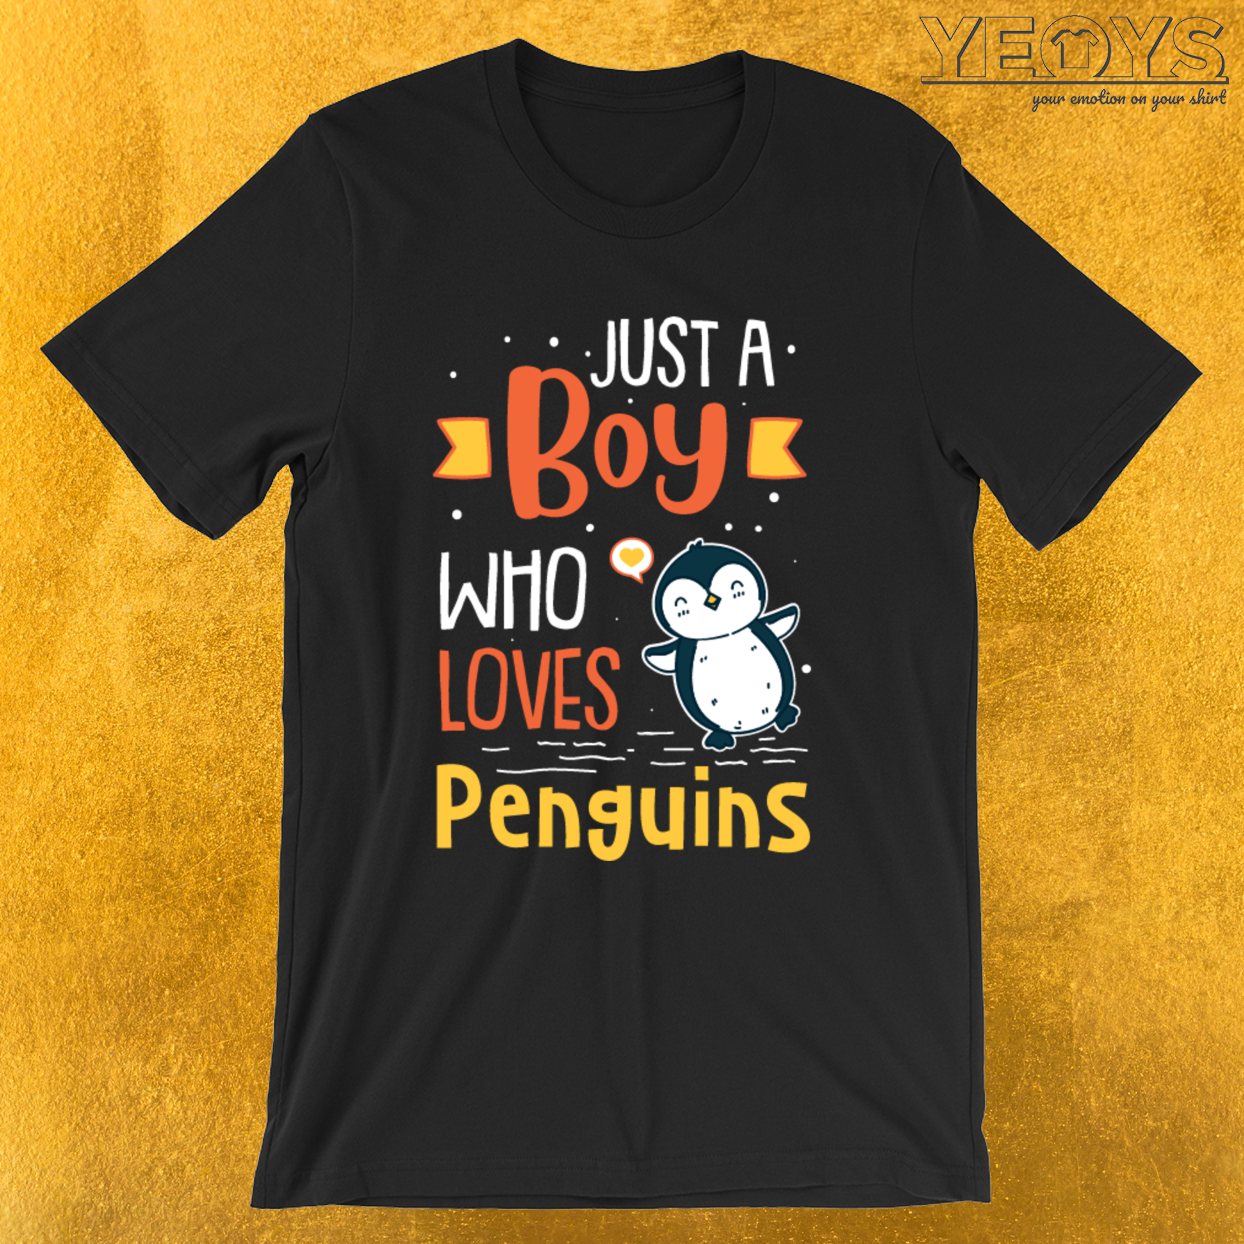 Just A Boy Who Loves Penguins – Funny Penguin Tee